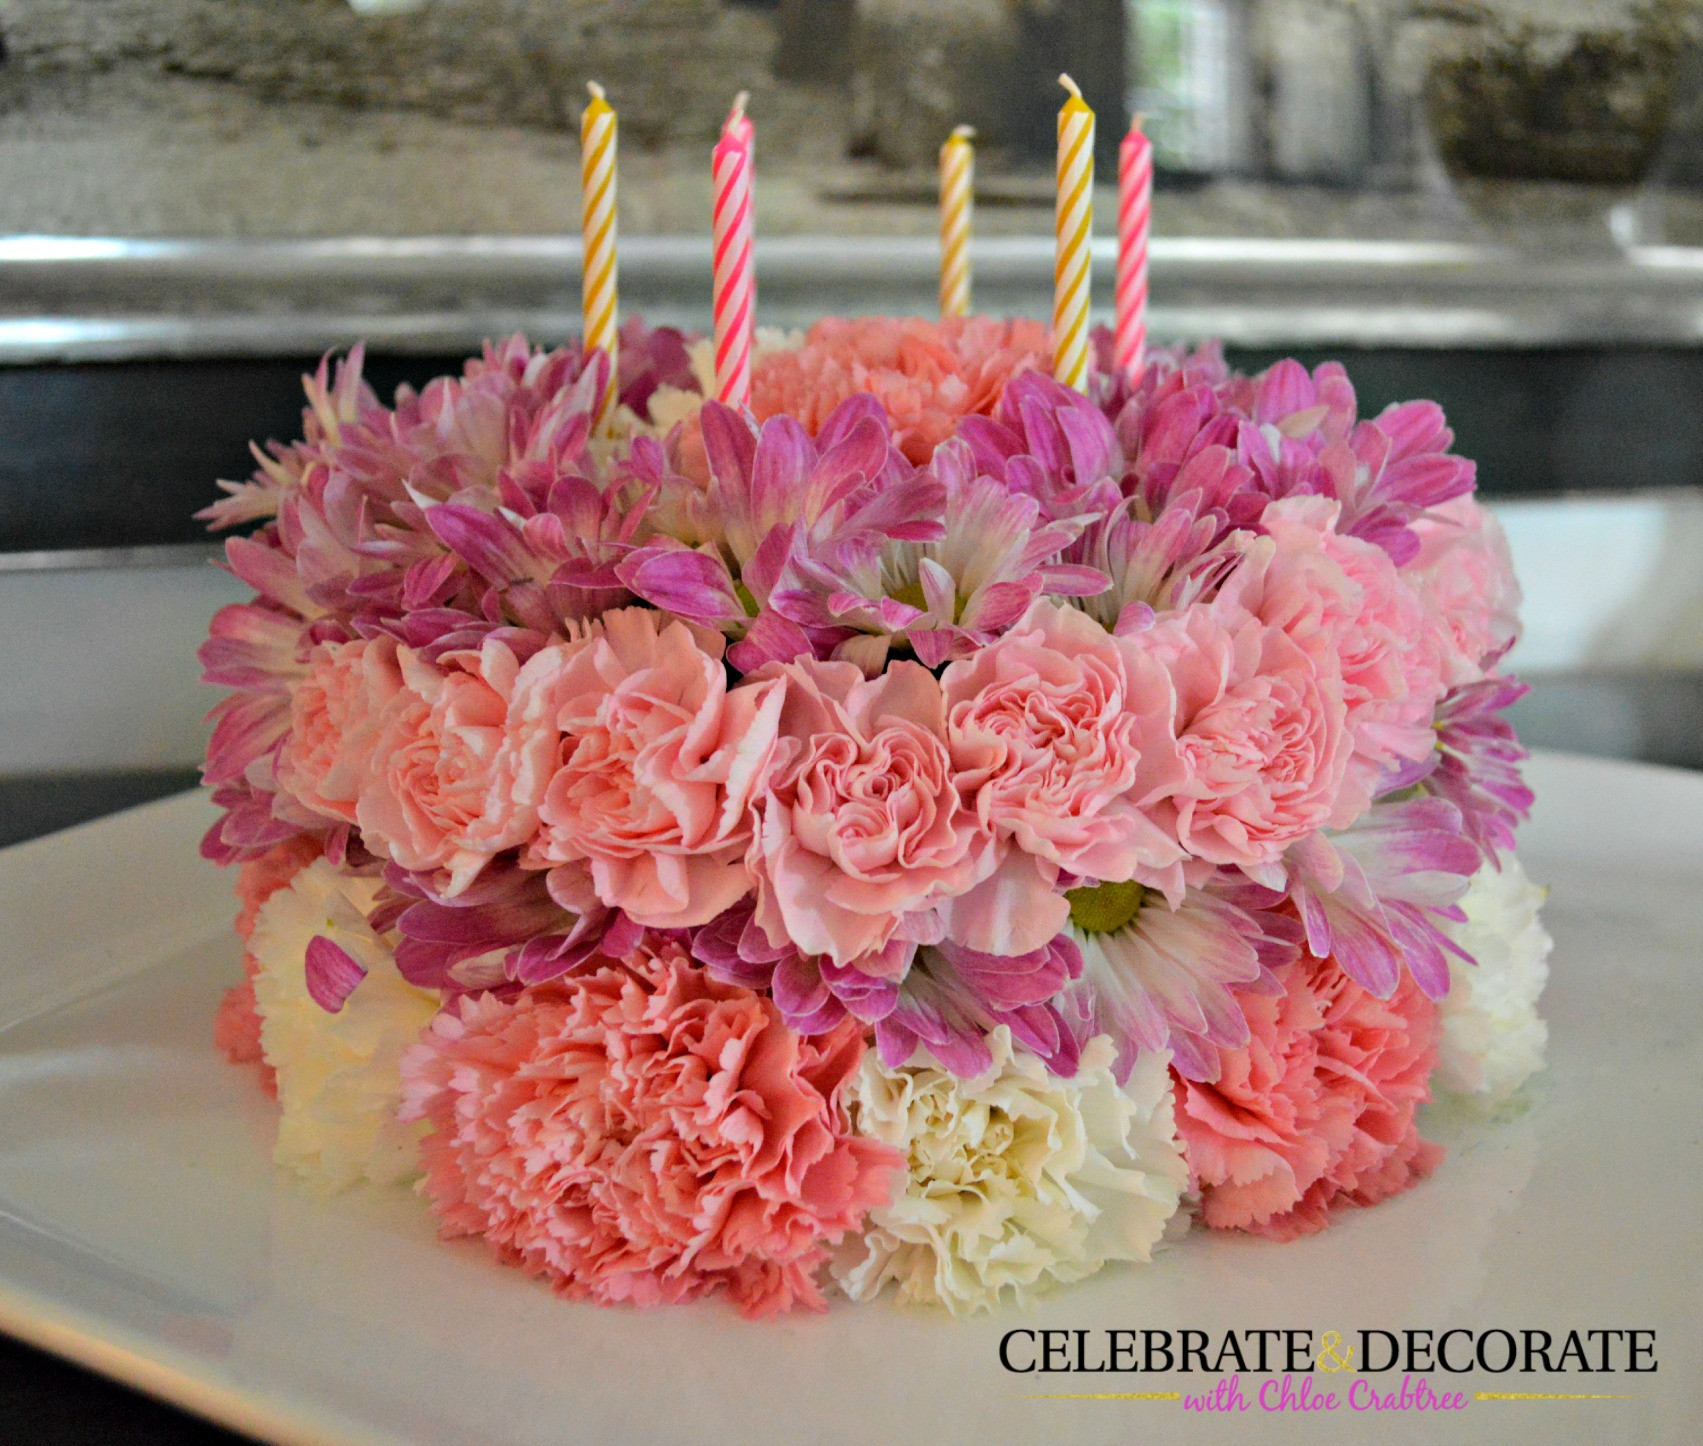 Flower Birthday Cakes
 How to Make a Floral Birthday Cake Celebrate & Decorate